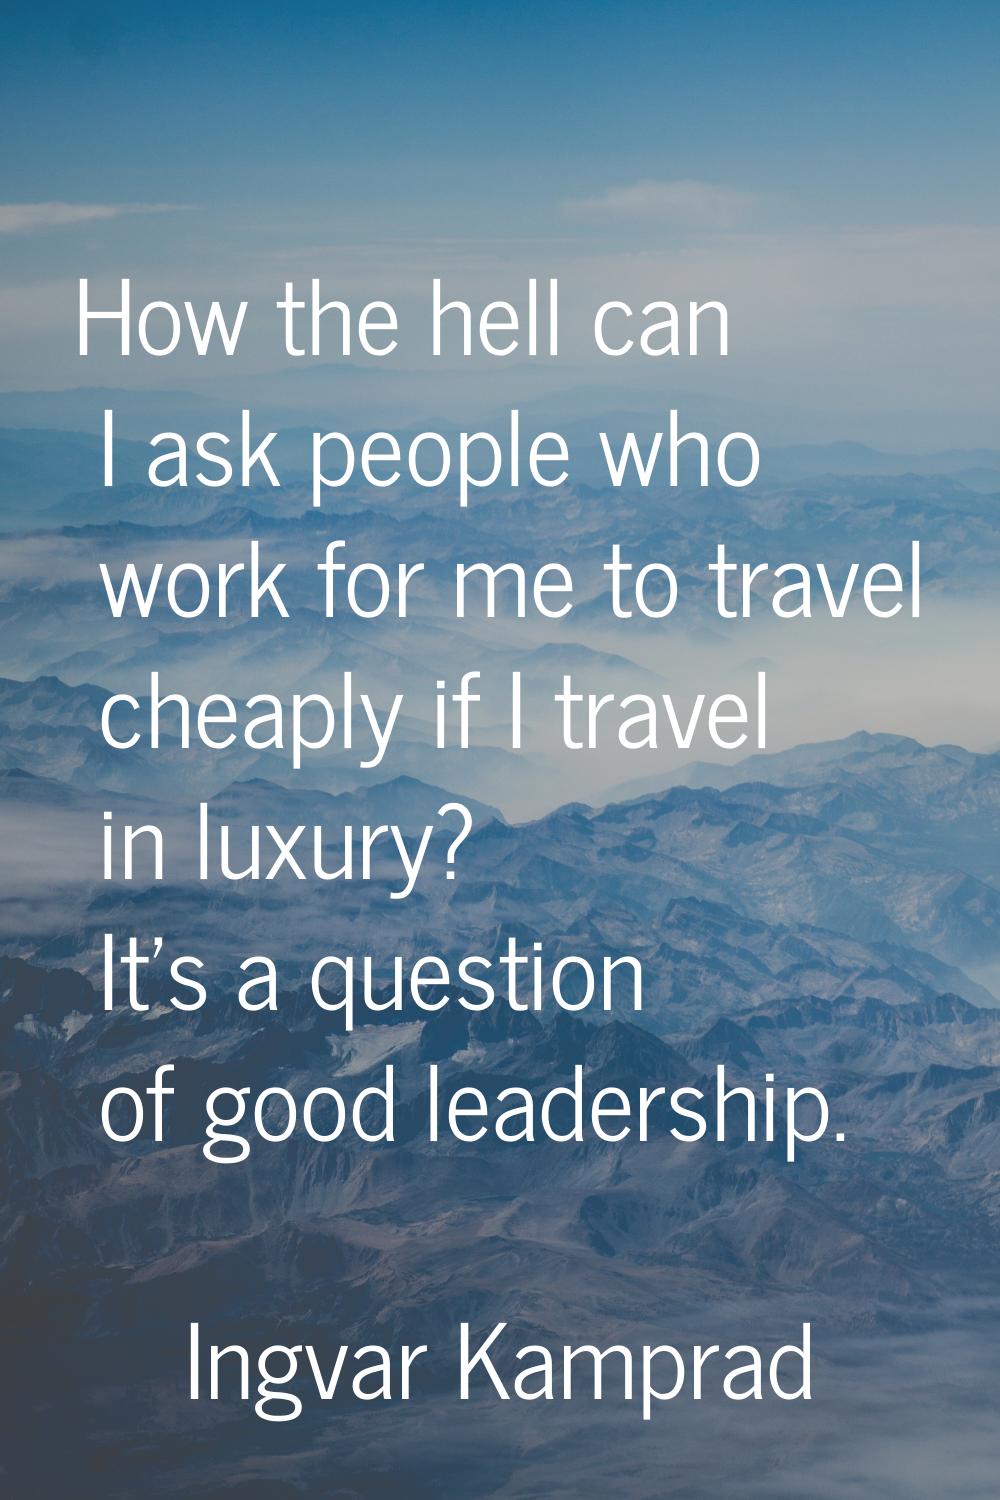 How the hell can I ask people who work for me to travel cheaply if I travel in luxury? It's a quest